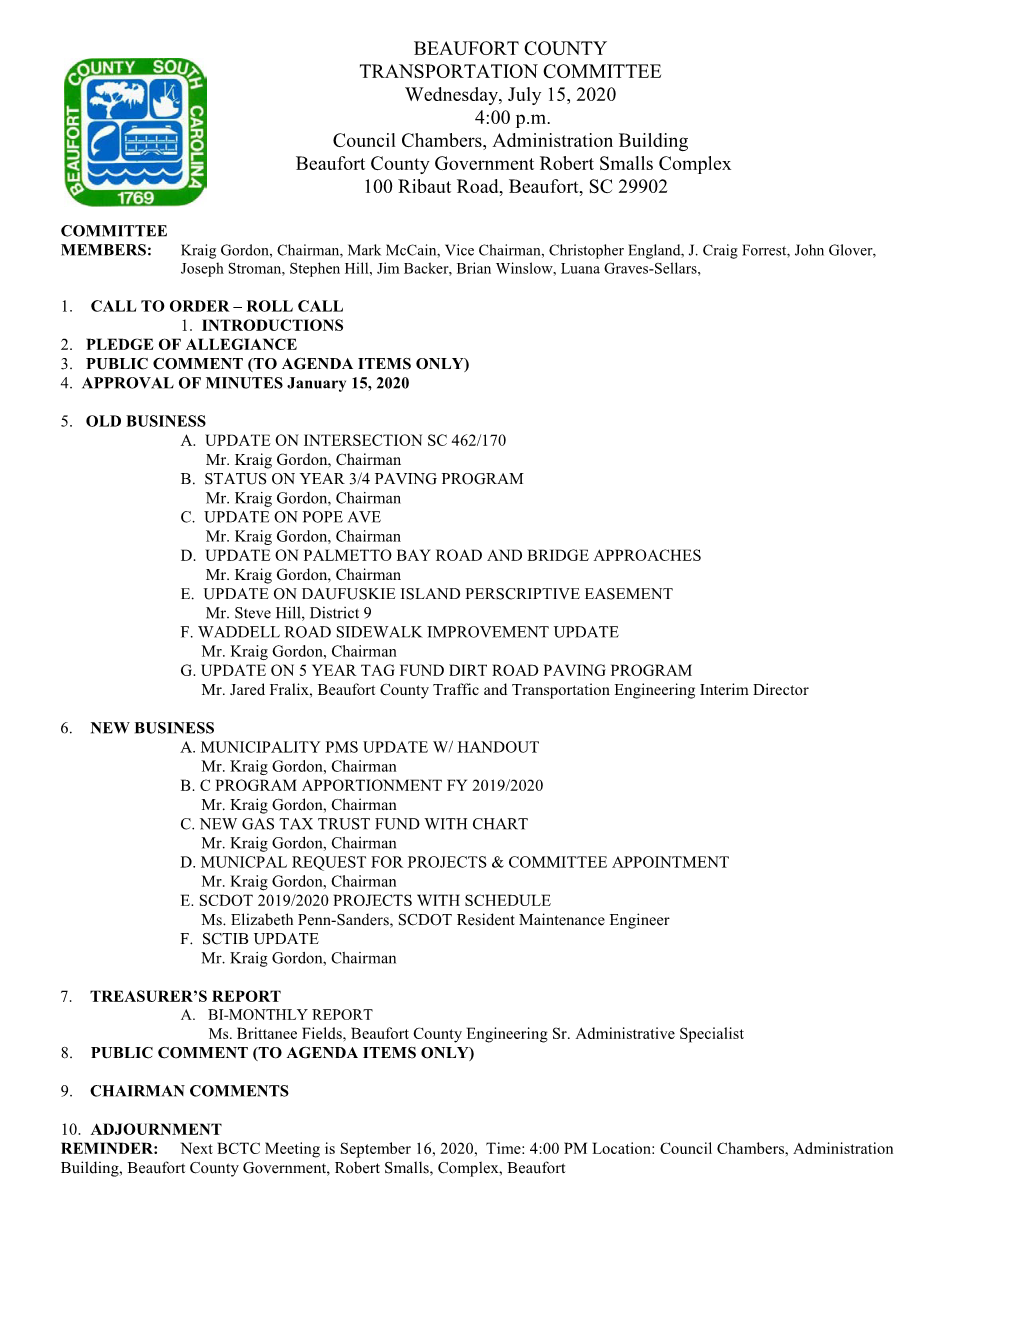 TRANSPORTATION COMMITTEE Wednesday, July 15, 2020 4:00 P.M